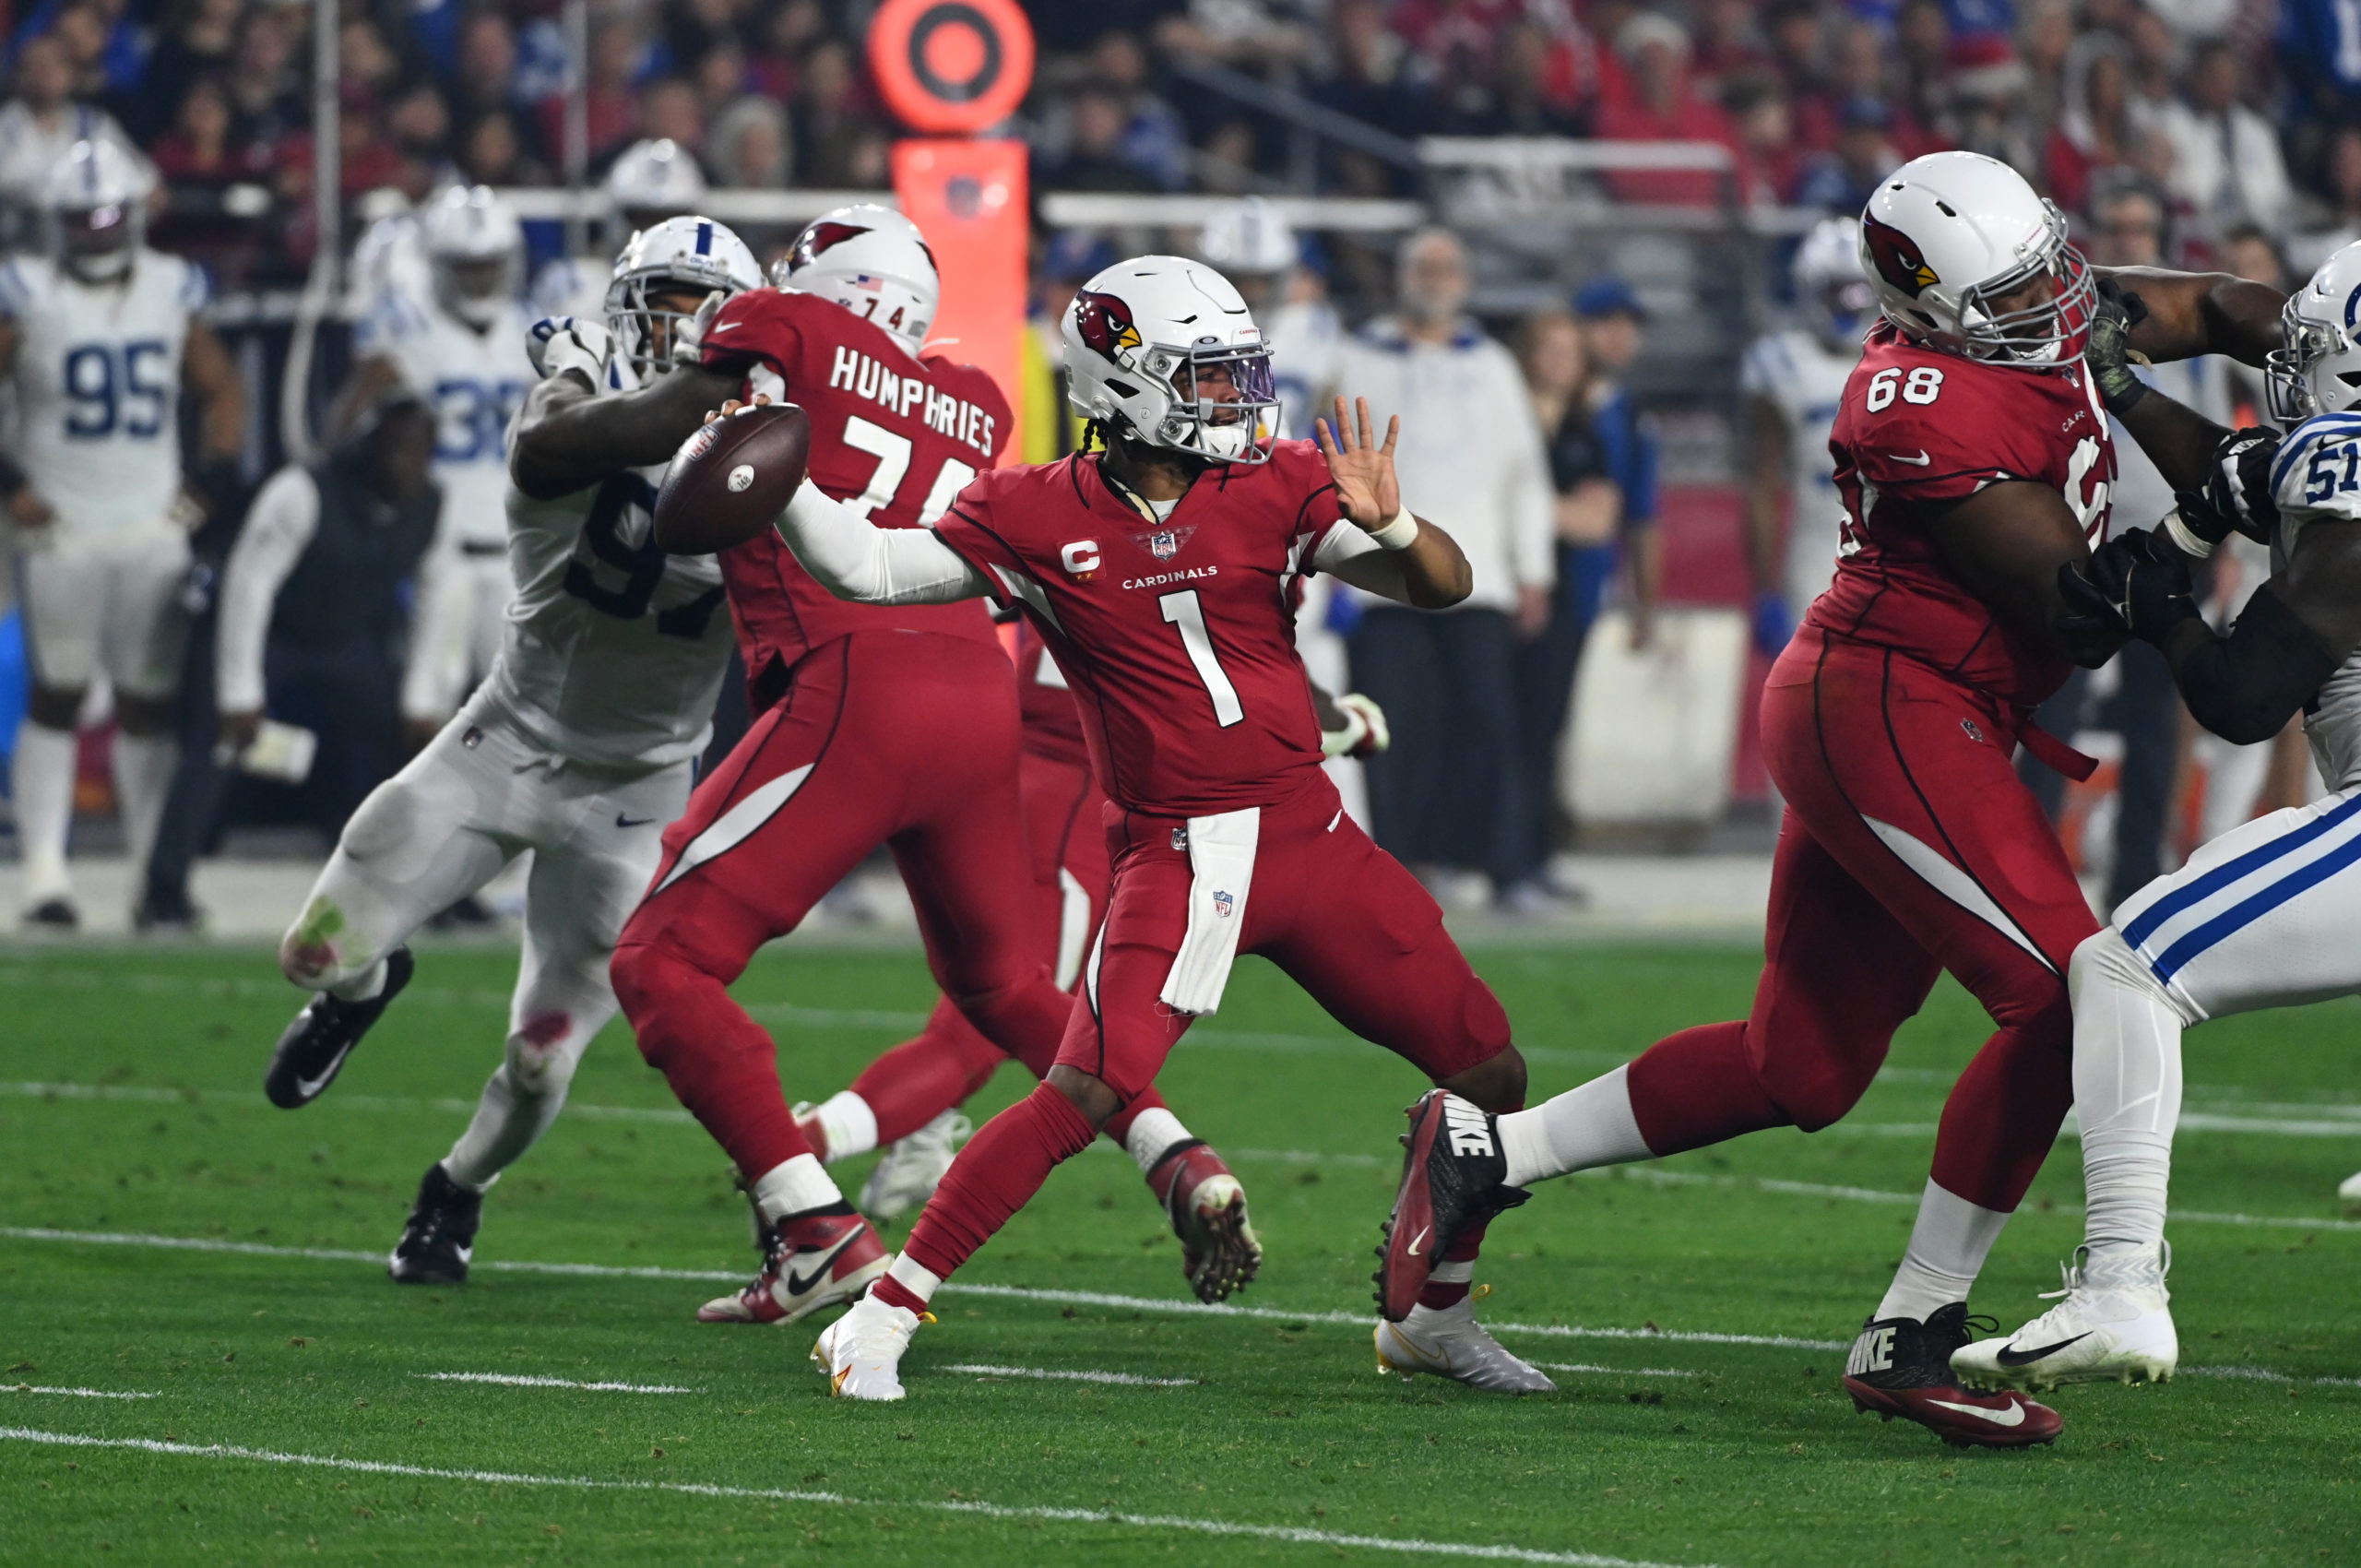 GLENDALE, ARIZONA - DECEMBER 25: Kyler Murray #1 of the Arizona Cardinals looks to throw the ball against the Indianapolis Colts at State Farm Stadium on December 25, 2021 in Glendale, Arizona. (Photo by Norm Hall/Getty Images)